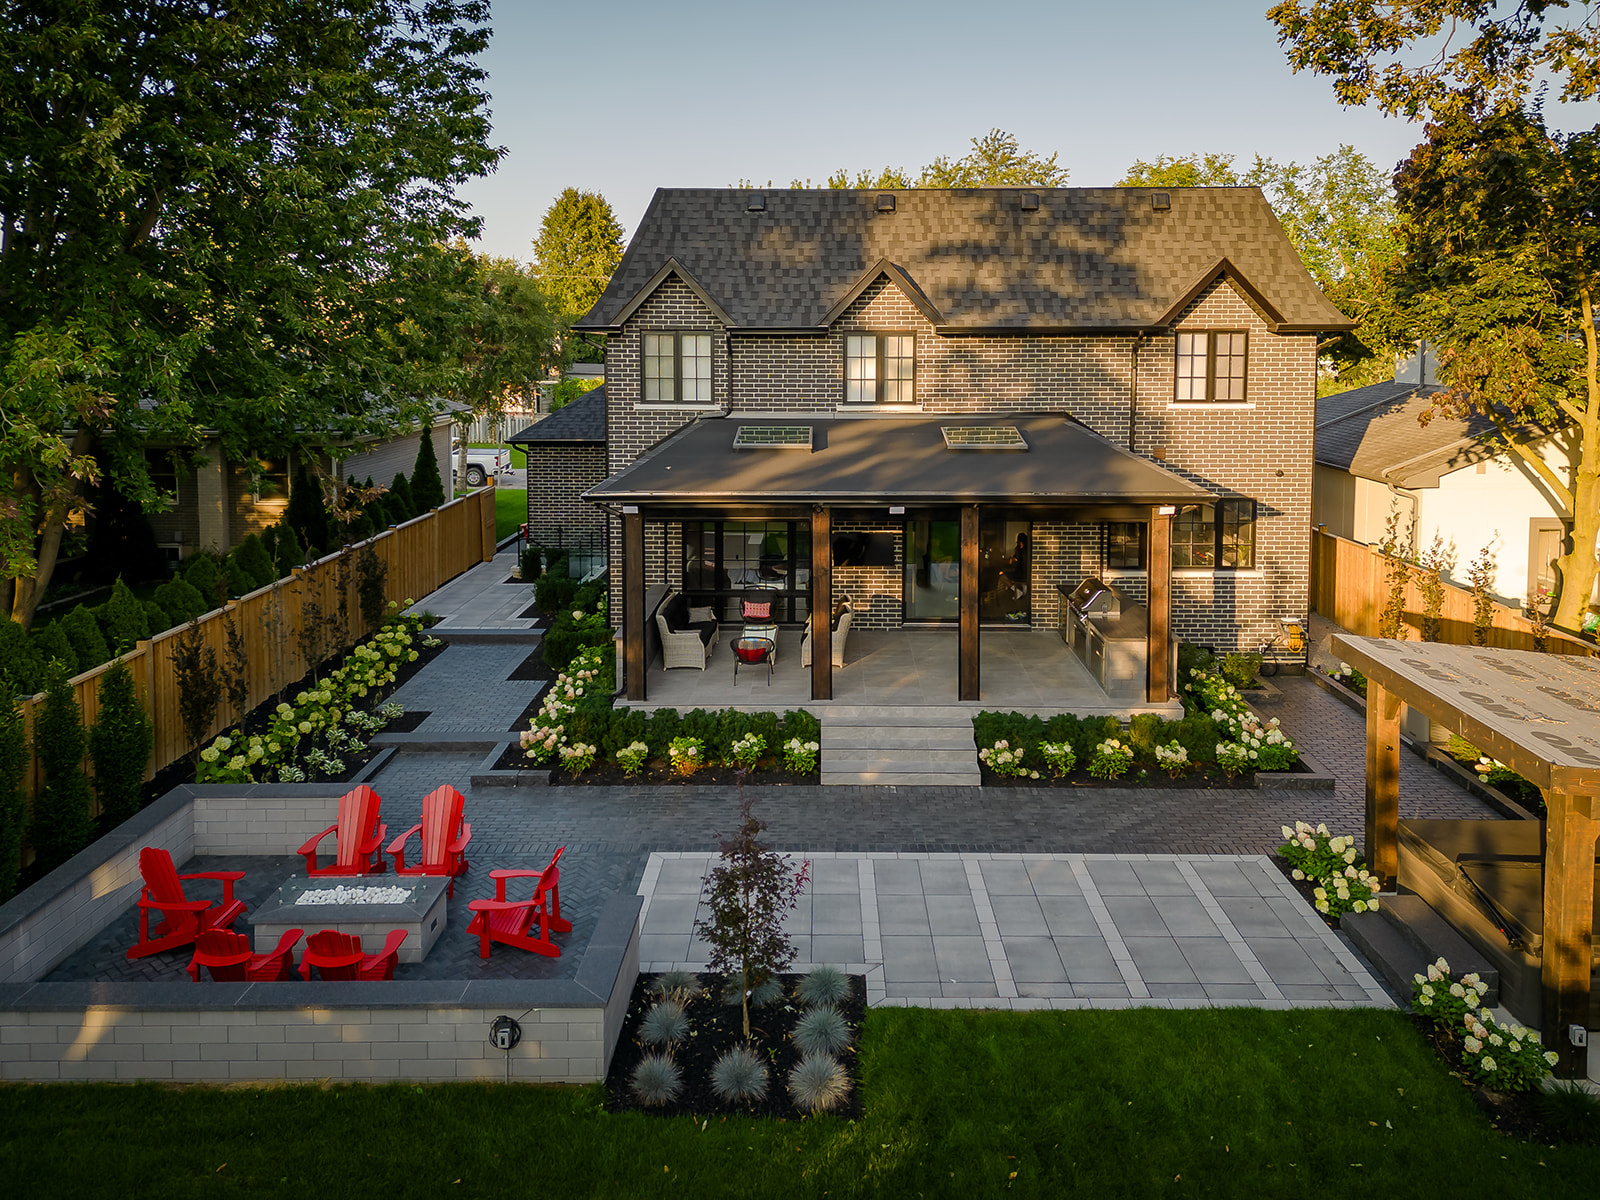 A patio setup with Muskoka chairs on the left and a hot tub on the right.